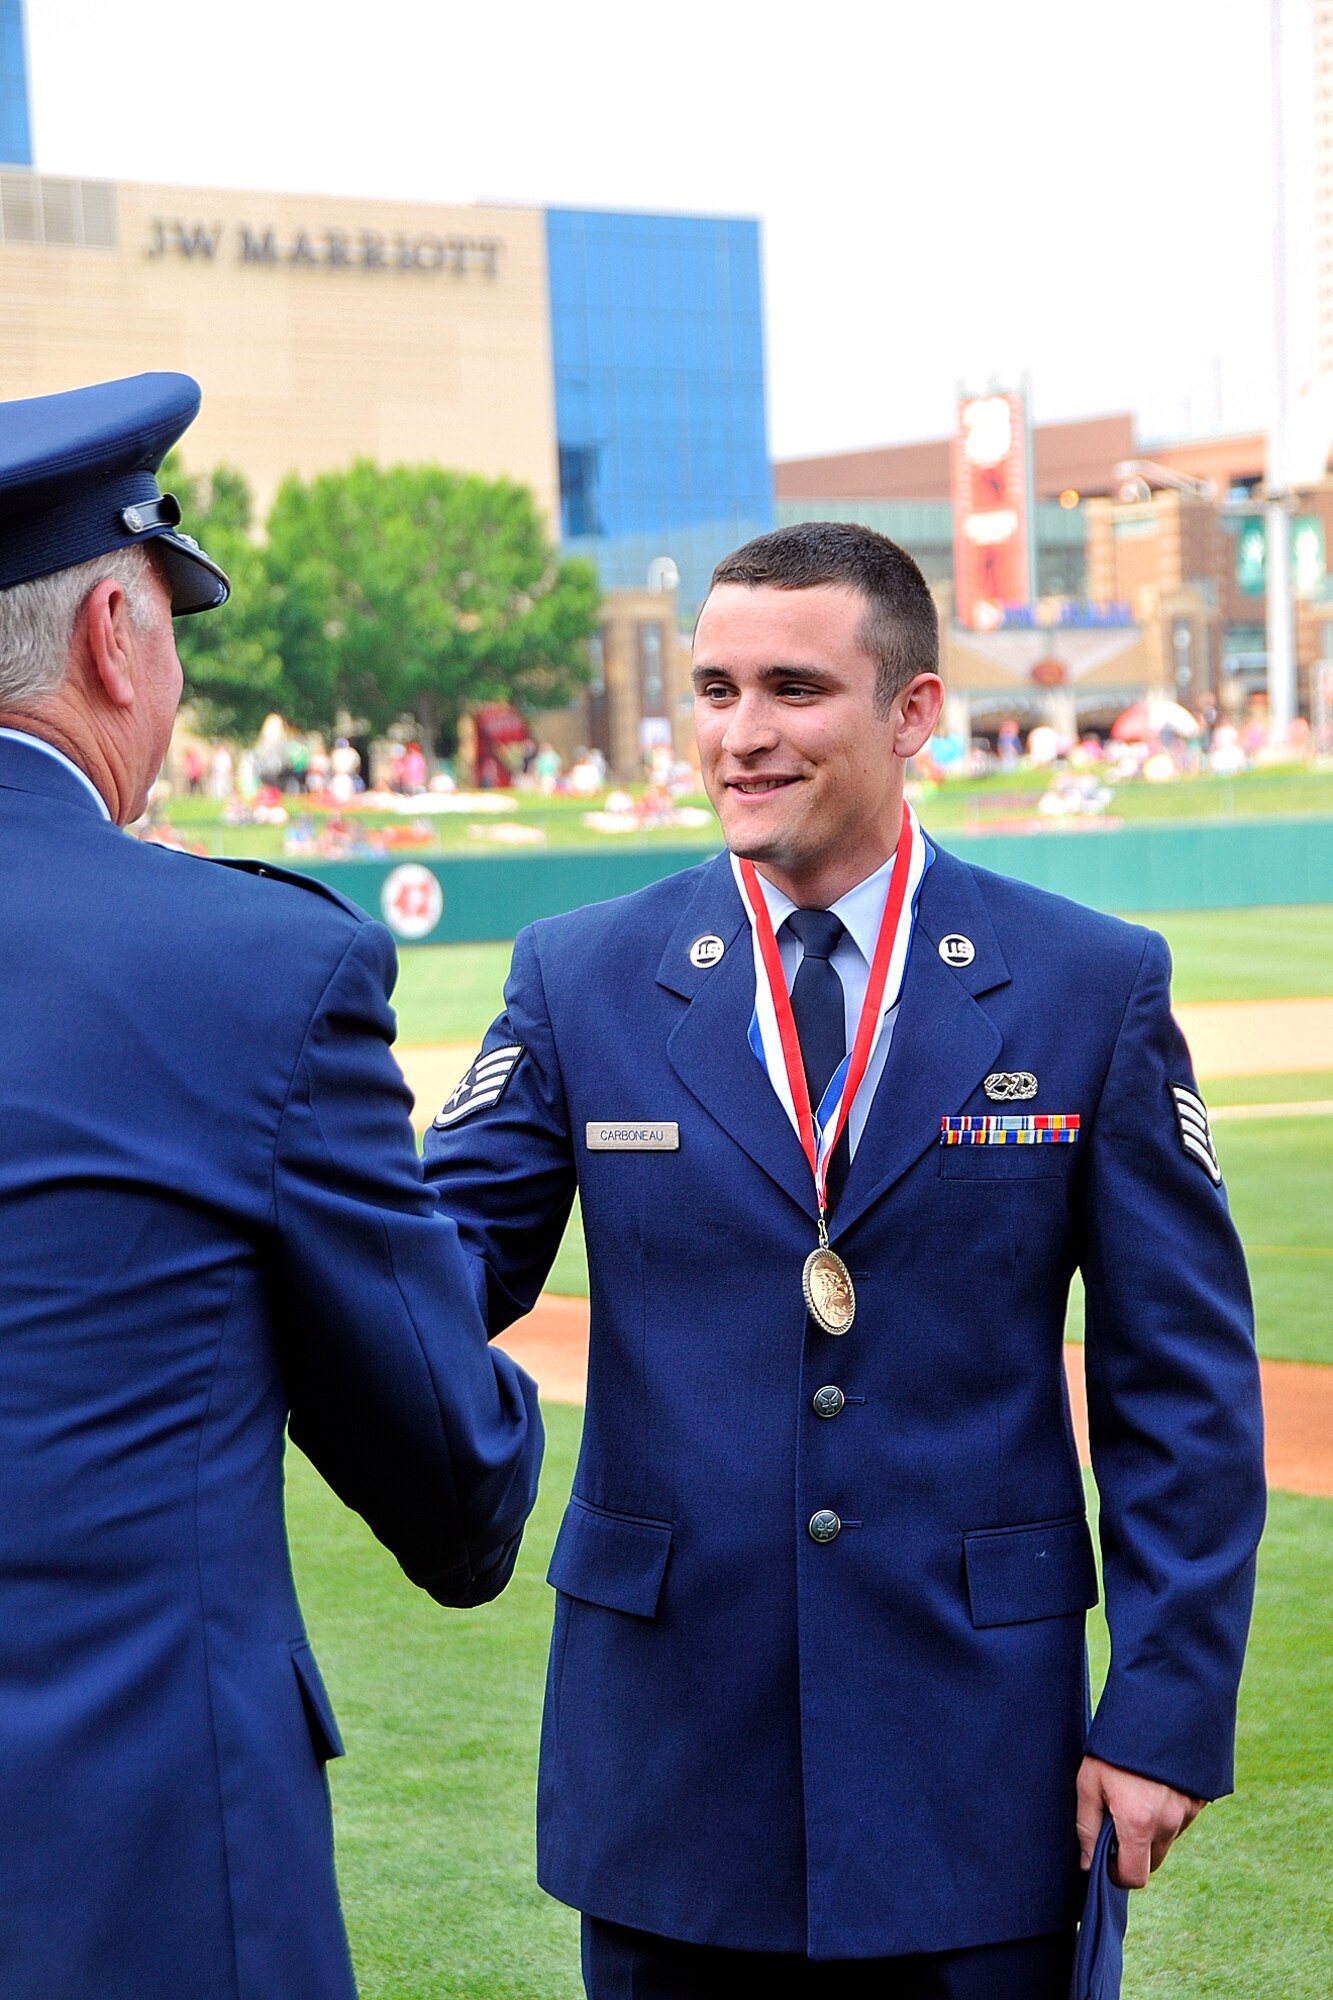 Indiana Air National Guard Staff Sgt. Andrew Carboneau shakes hands with Brigadier General Stewart Goodwin, Assistant Adjutant General - Air, Indiana National Guard, on Victory Field, home of the Indianapolis Indians, in Indianapolis, Ind. on May 20, 2011.  Carboneau was just awarded Airman of the Year for 2010 for the Indiana Air National Guard and was being presented the award at the Armed Forces Day Picnic.  Photo by Indiana Air National Guard Staff Sgt. Justin Goeden. RELEASED